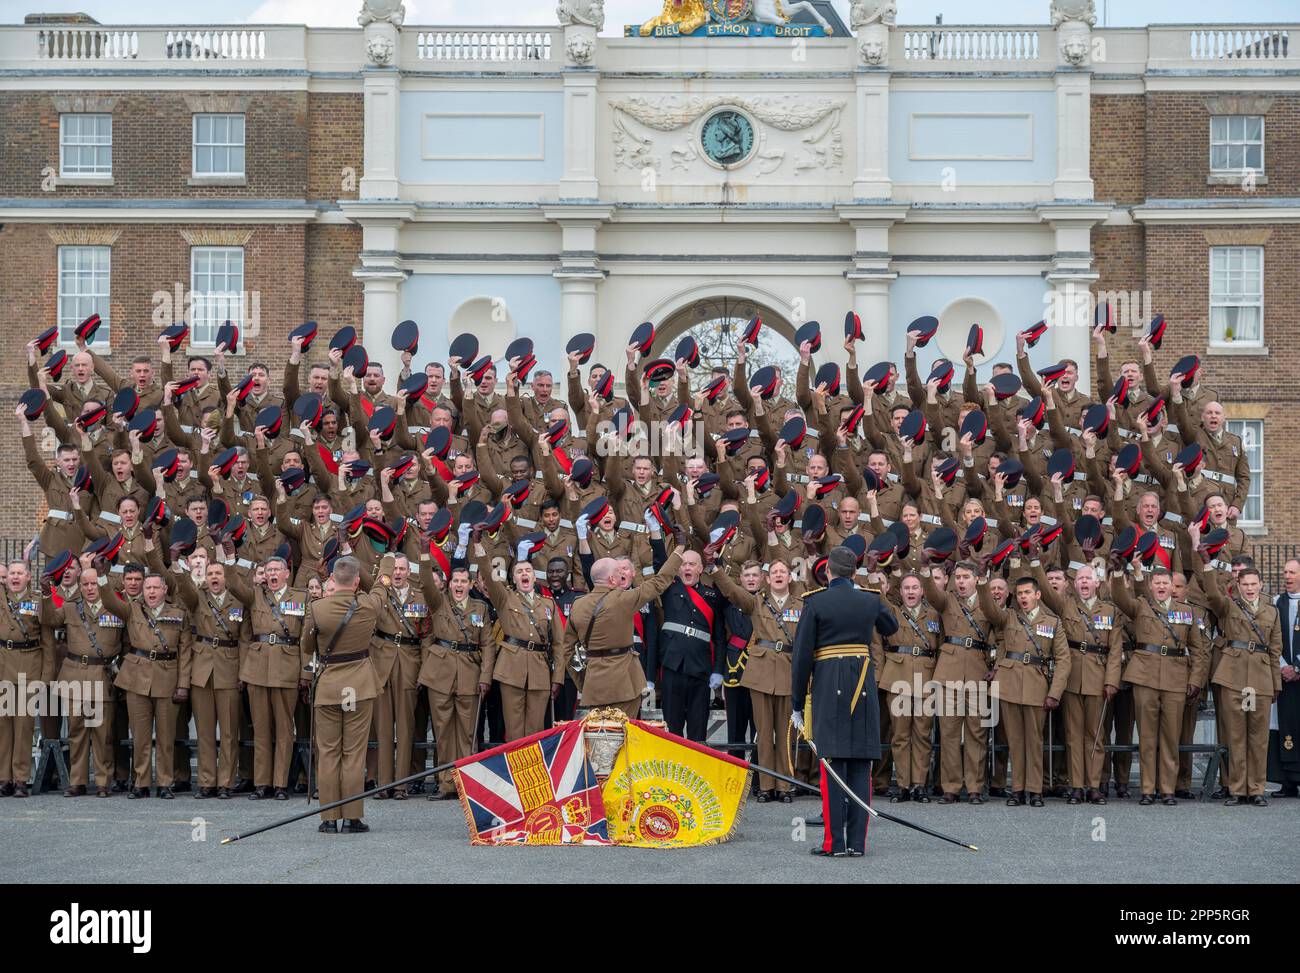 Woolwich, London, UK. 22nd Apr 2023. 4th Battalion The Princess of Wales's Royal Regiment receives its first set of Colours (Ceremonial Regimental flags) at The Royal Artillery Barracks, London, UK. In attendance is HRH Prince Frederik, Prince of Denmark, as acting Commander in Chief of the regiment. Credit: Malcolm Park/Alamy Live News Stock Photo